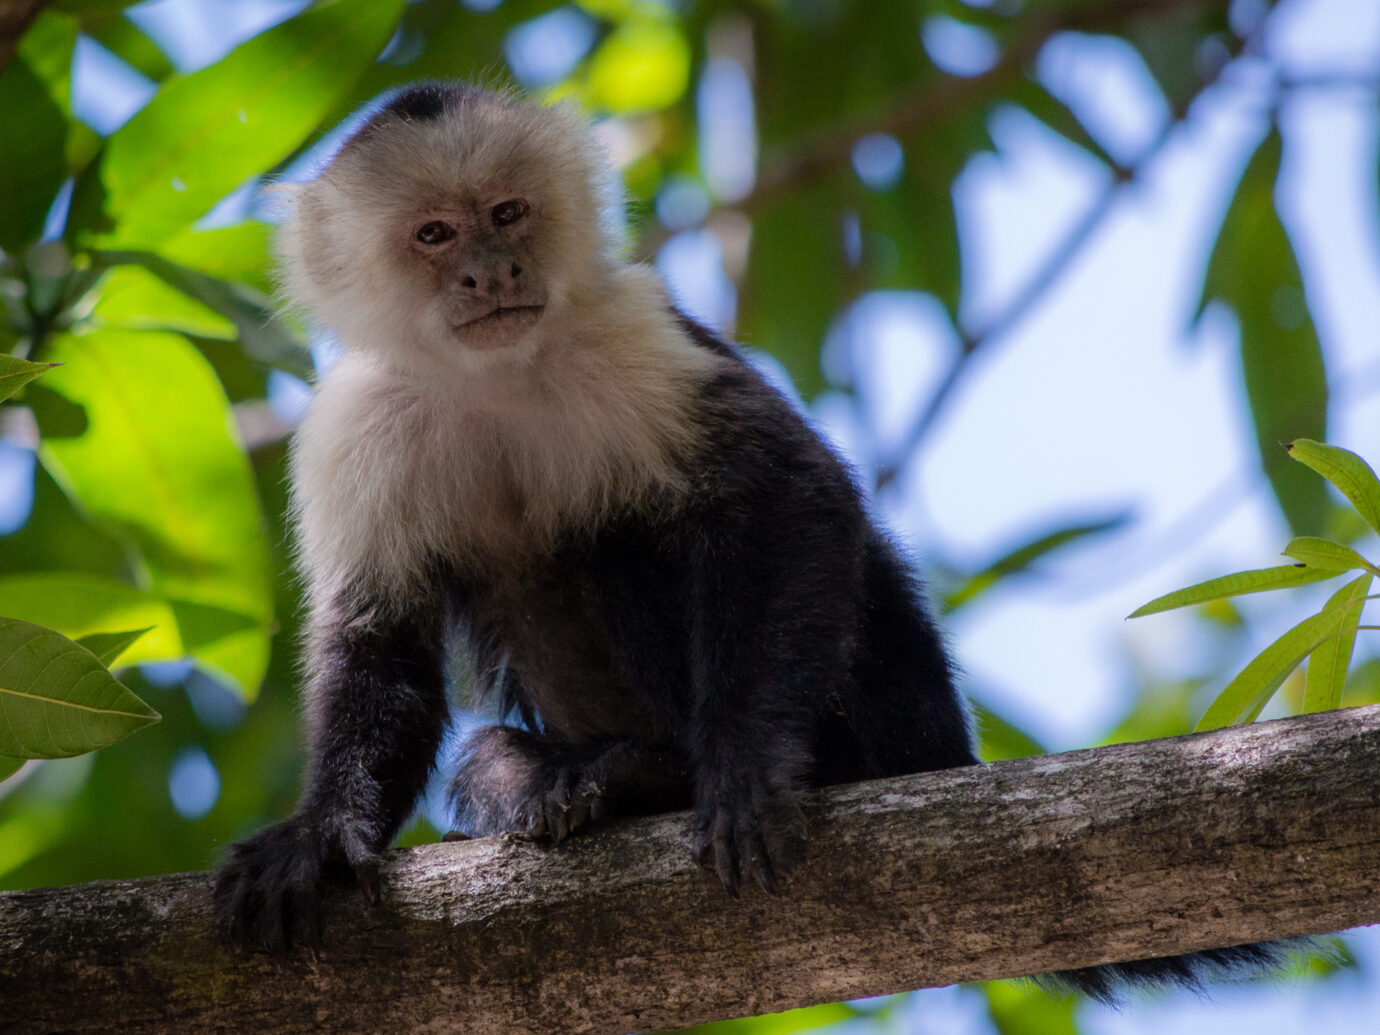 Caputin monkey spotted at Palo Verde national park in Costa Rica